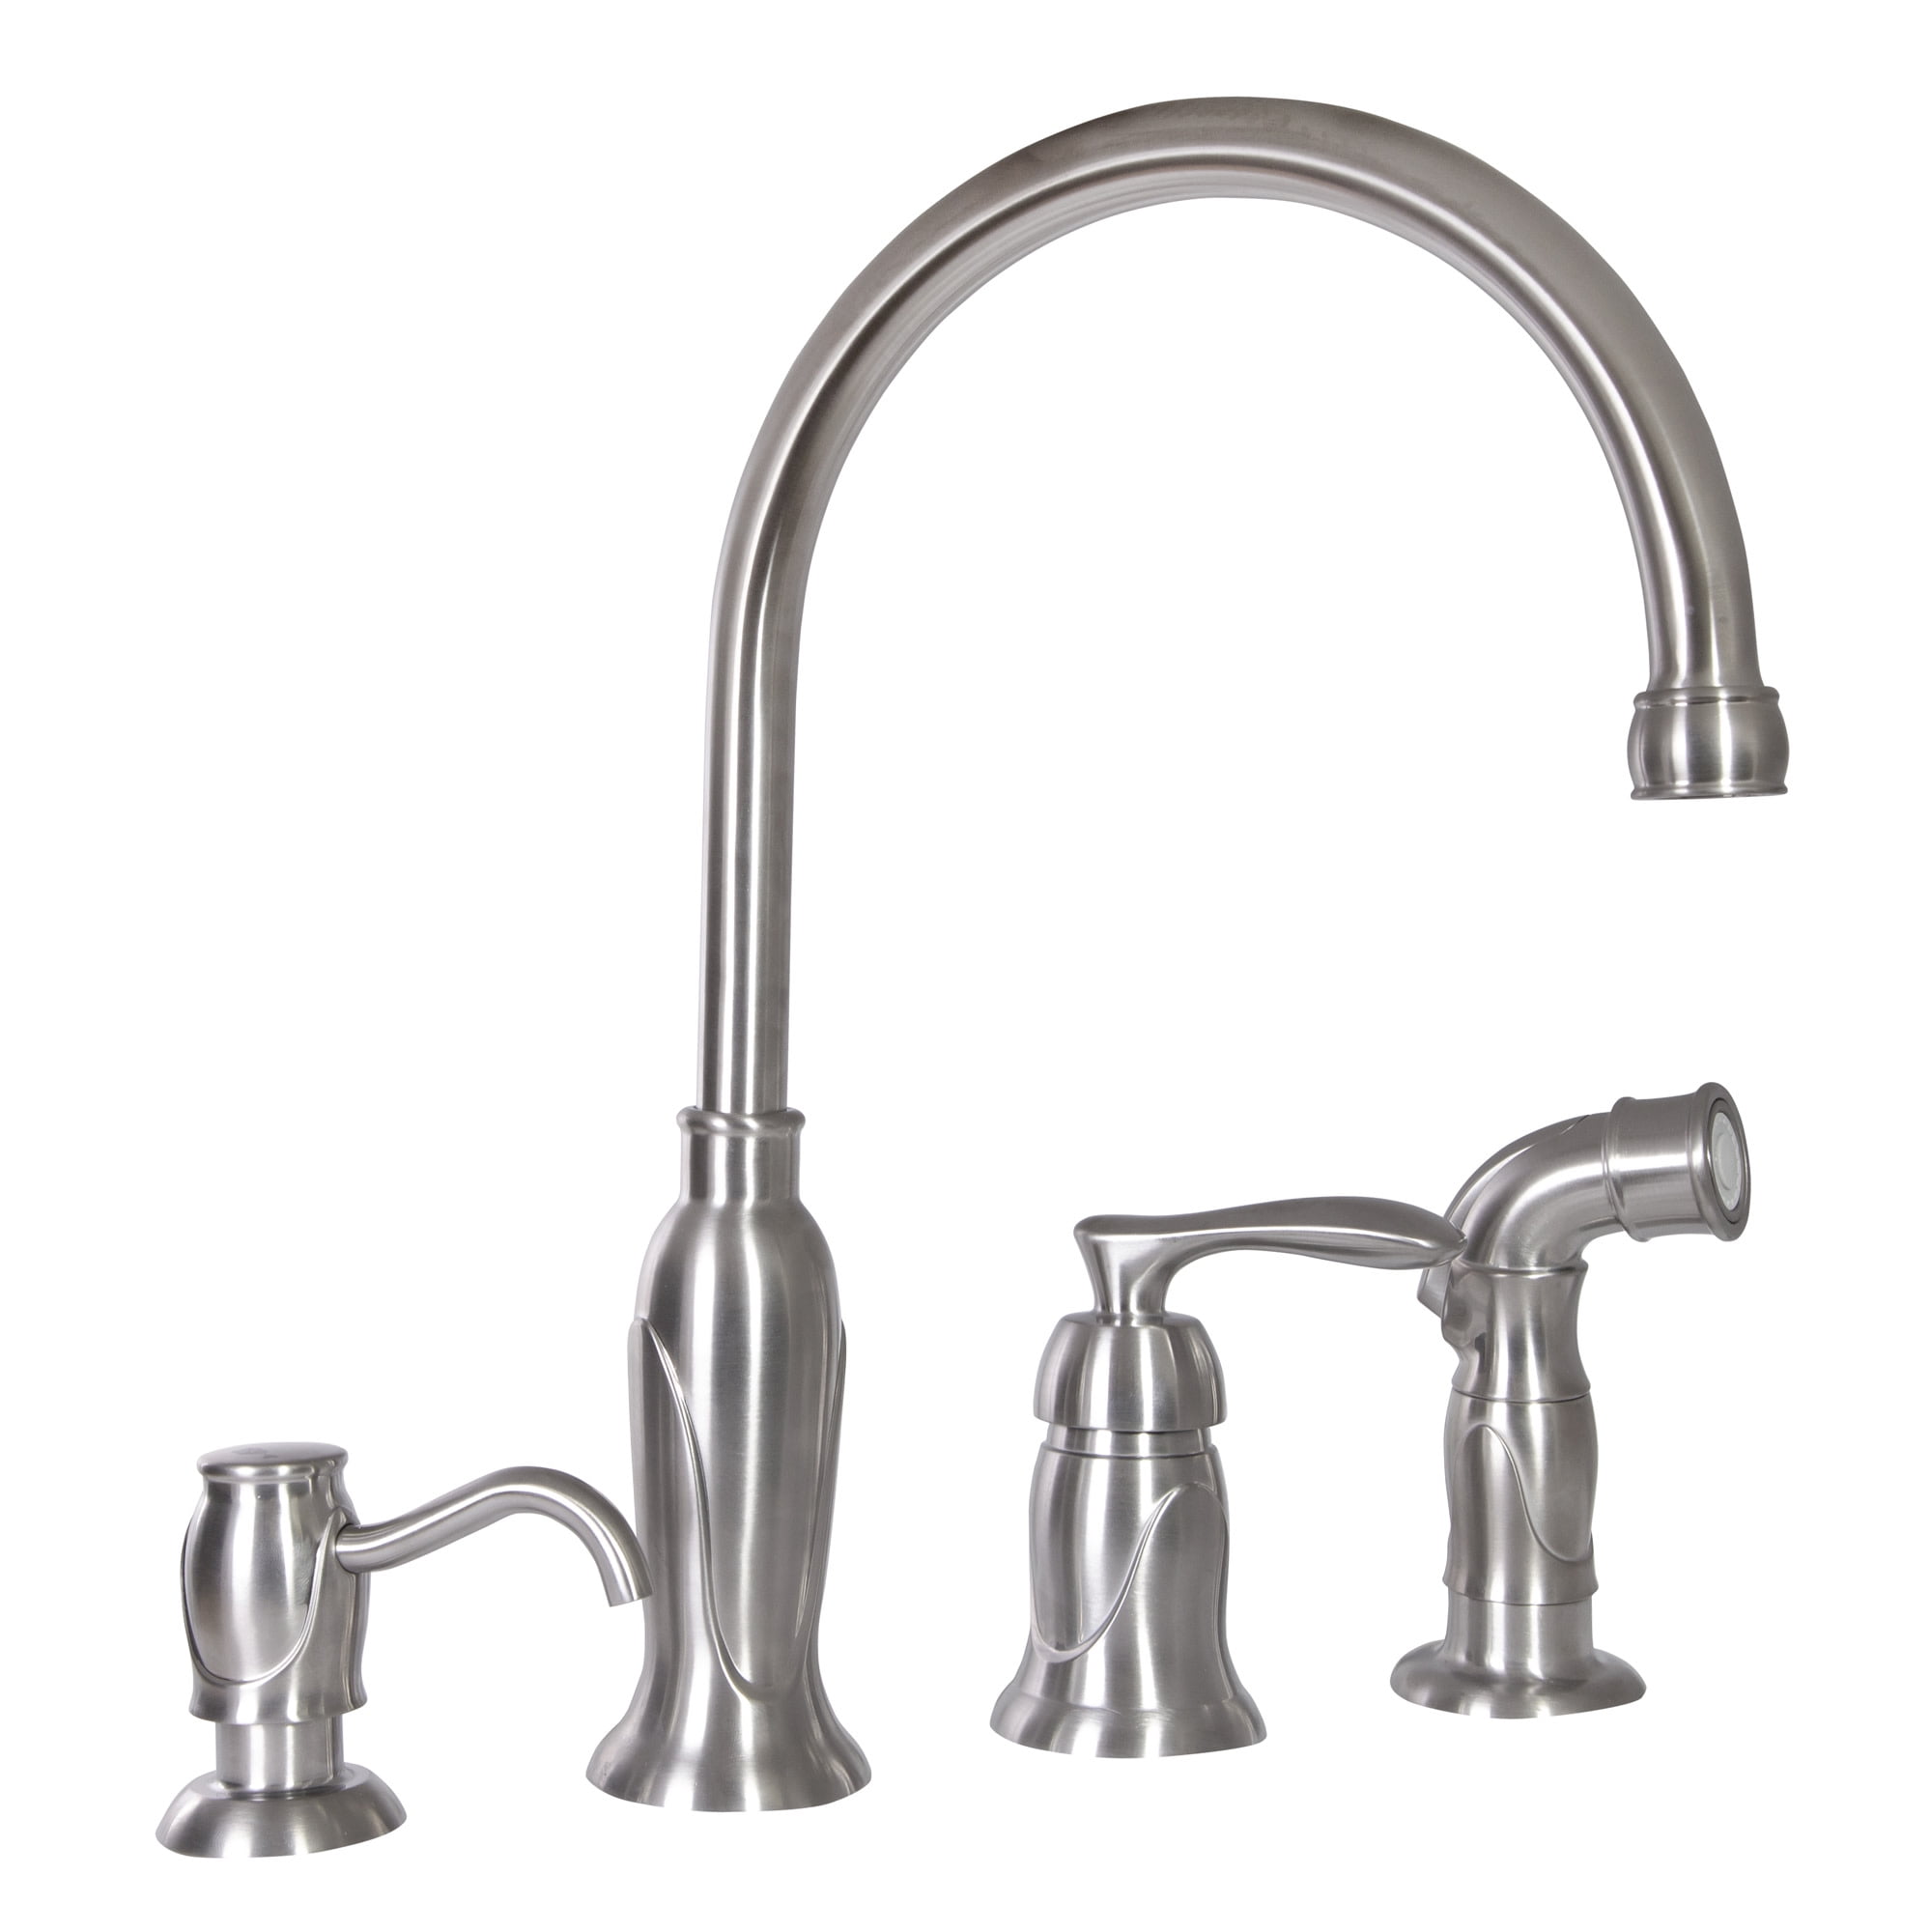 Madison Kitchen Faucet with Sprayer and Soap Dispenser, Satin Nickel